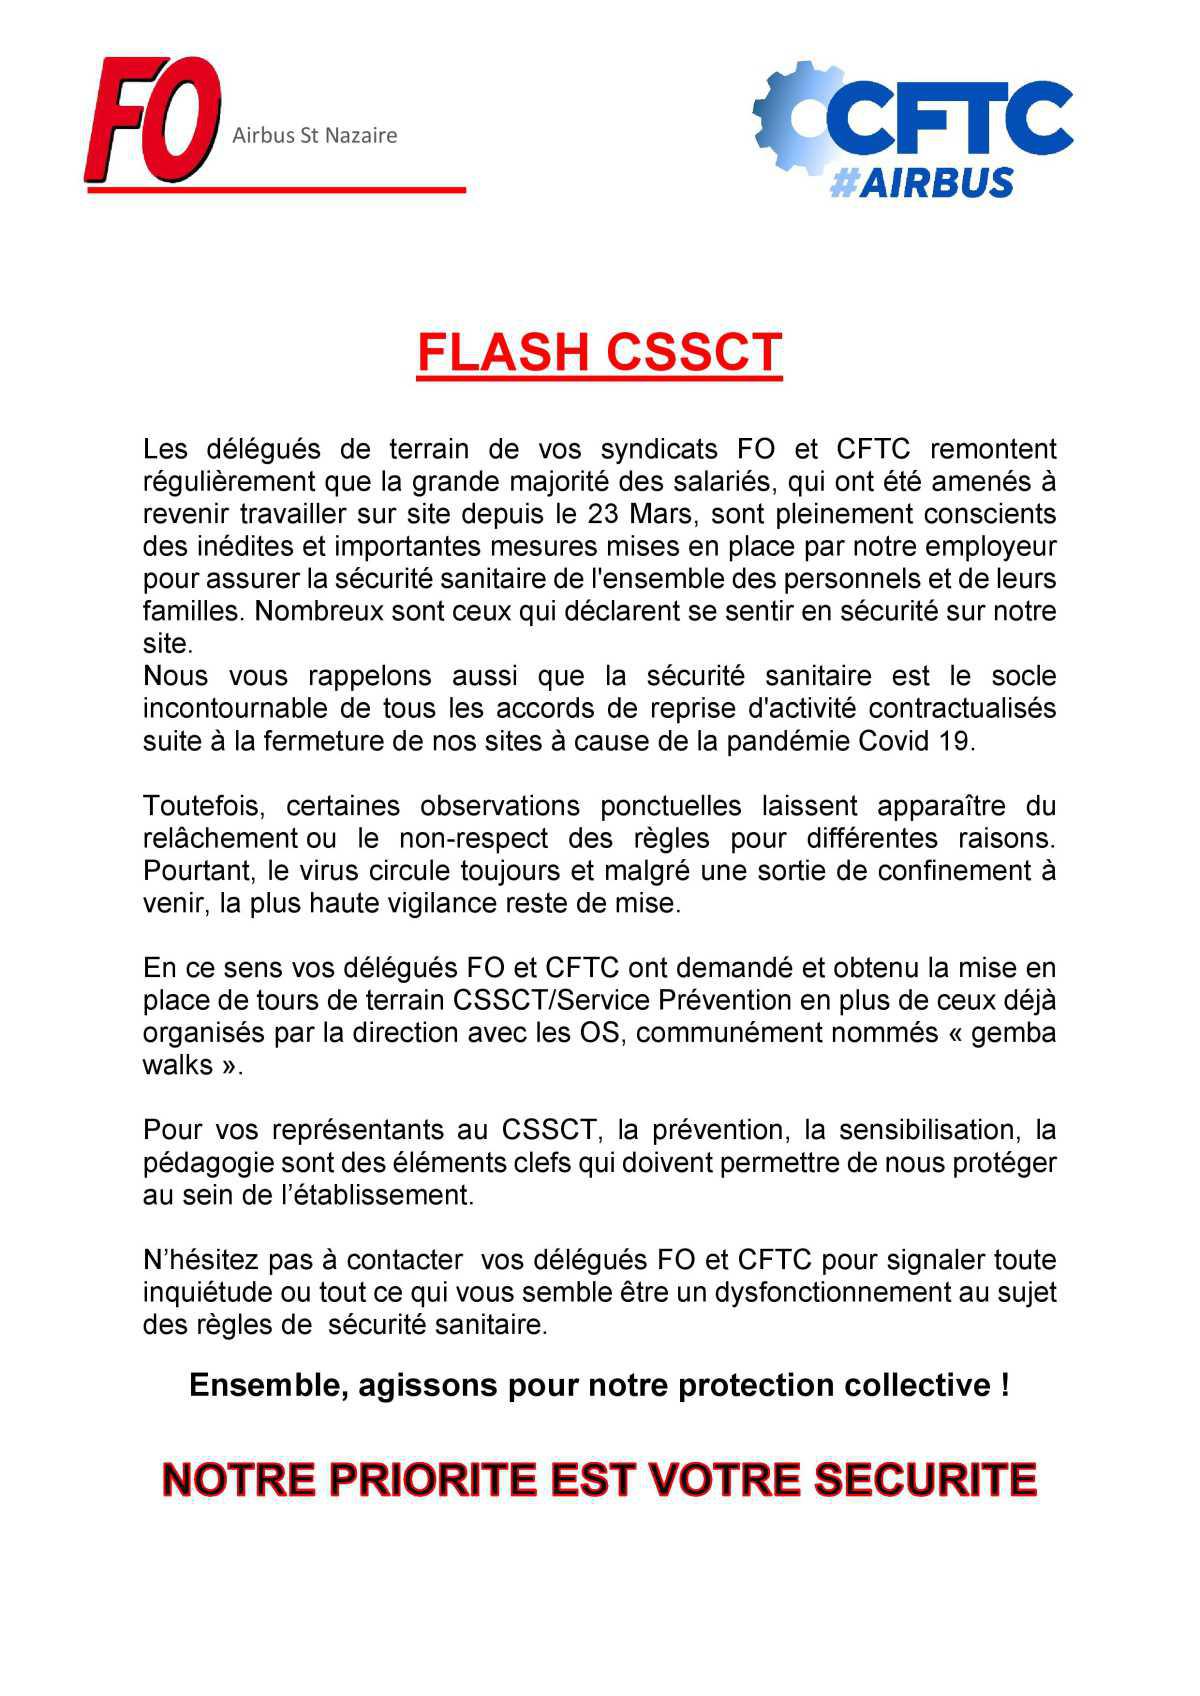 Flash CSSCT FO/CFTC